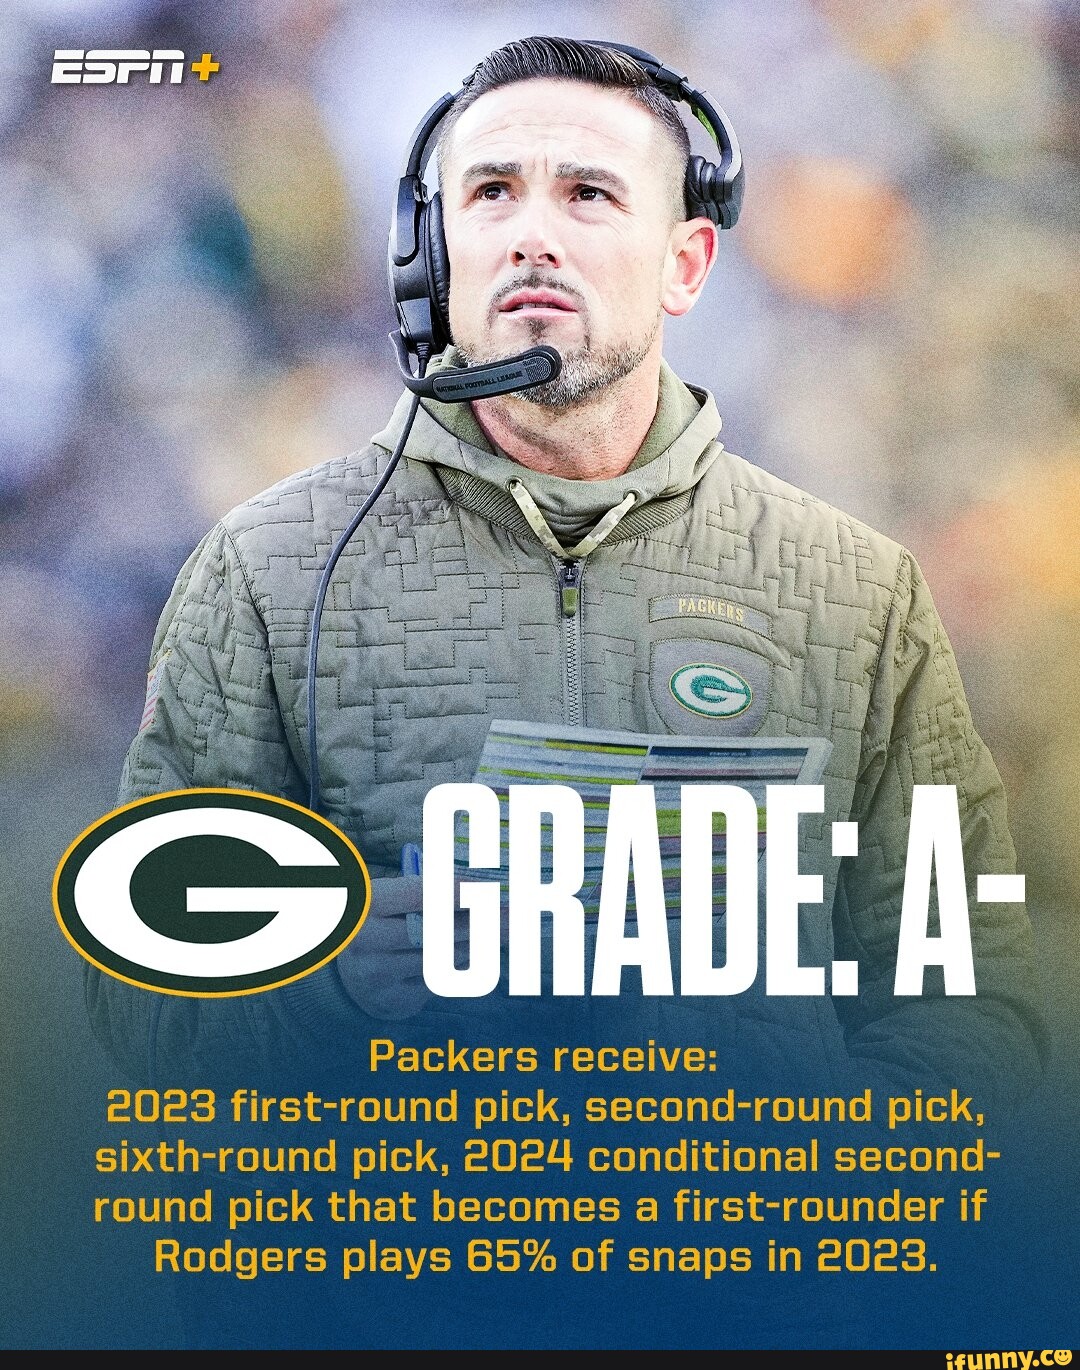 GRADE Packers receive 2023 firstround pick, secondround pick, sixth